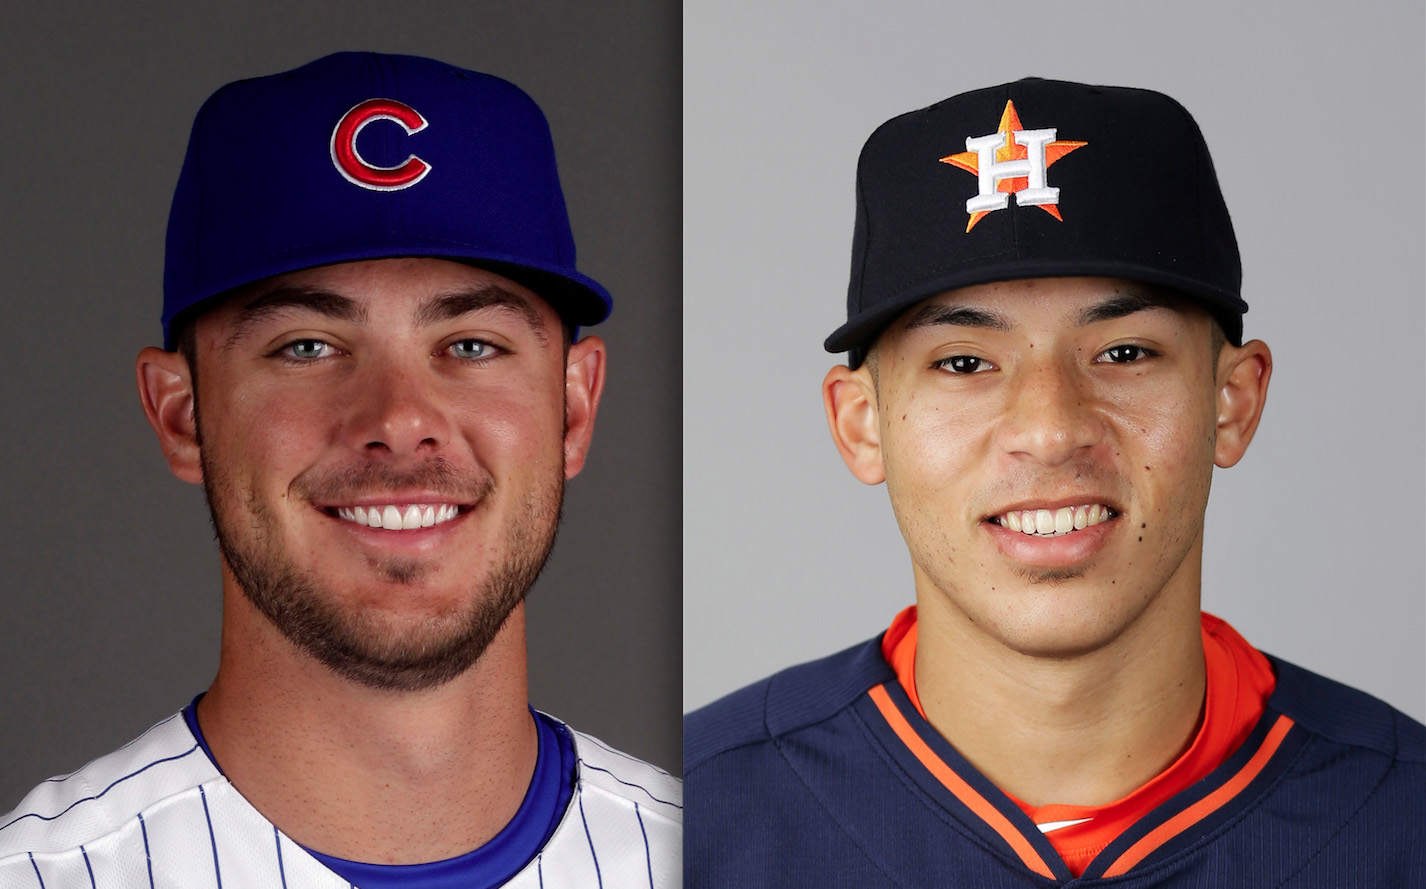 Cubs' Kris Bryant, Astros' Carlos Correa claim Rookie of the Year honors